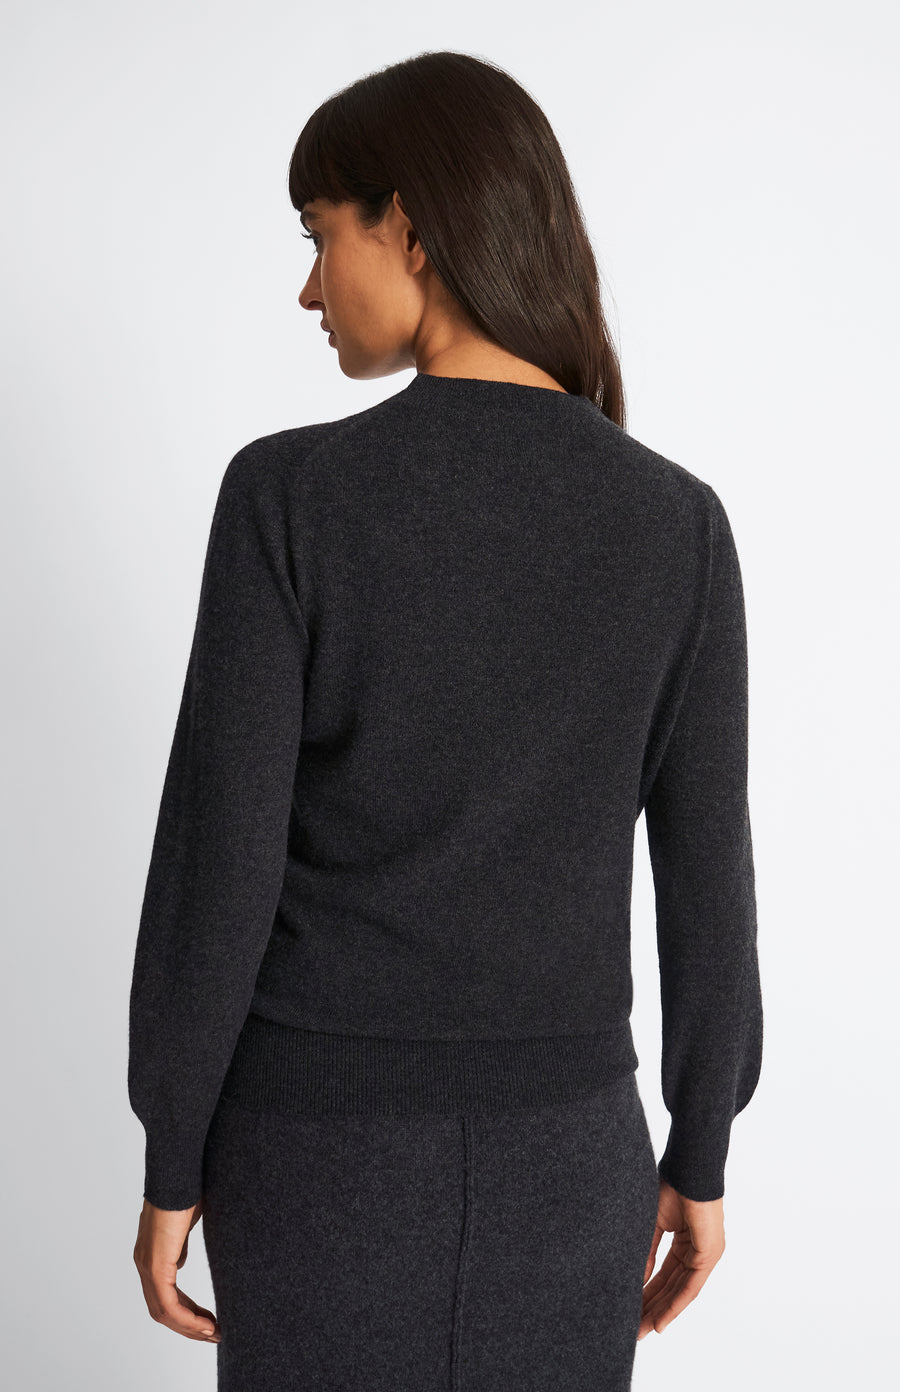 Pringle of Scotland Round Neck Pointelle Argyle Cashmere Jumper in Charcoal rear view